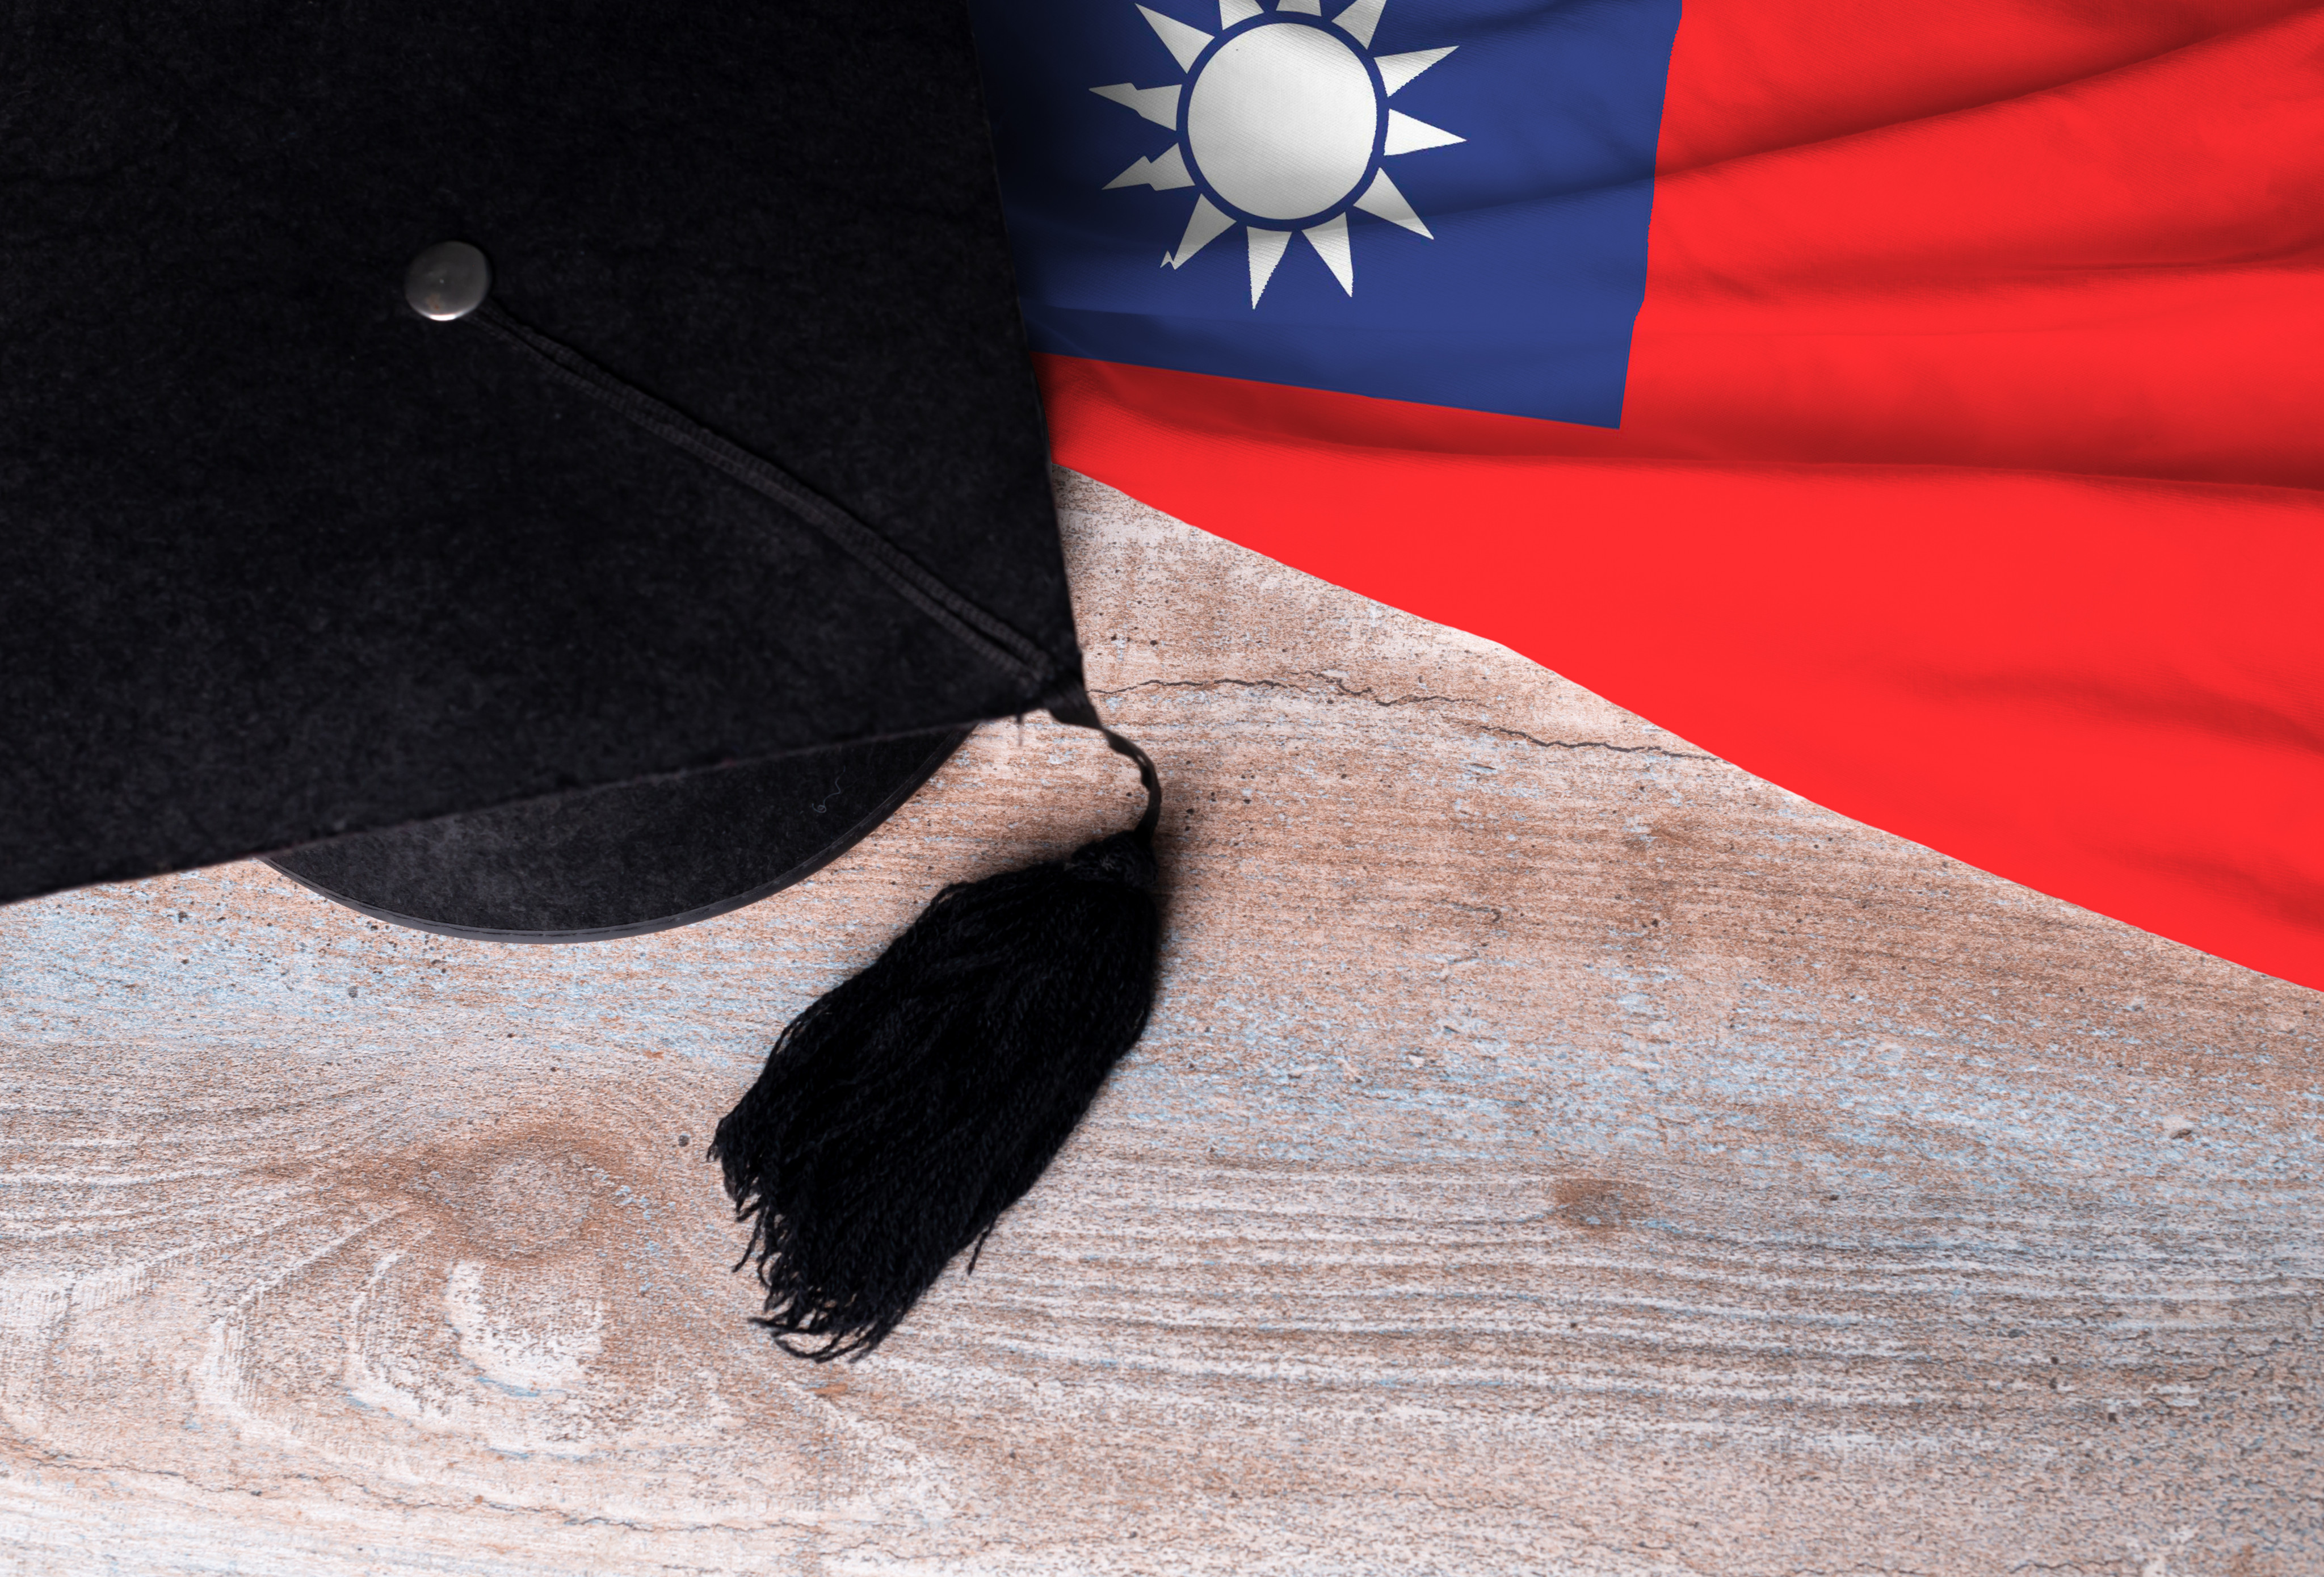 Most international students come from Southeast Asia due to Taiwan’s New Southbound Policy. Photo: Shutterstock Images